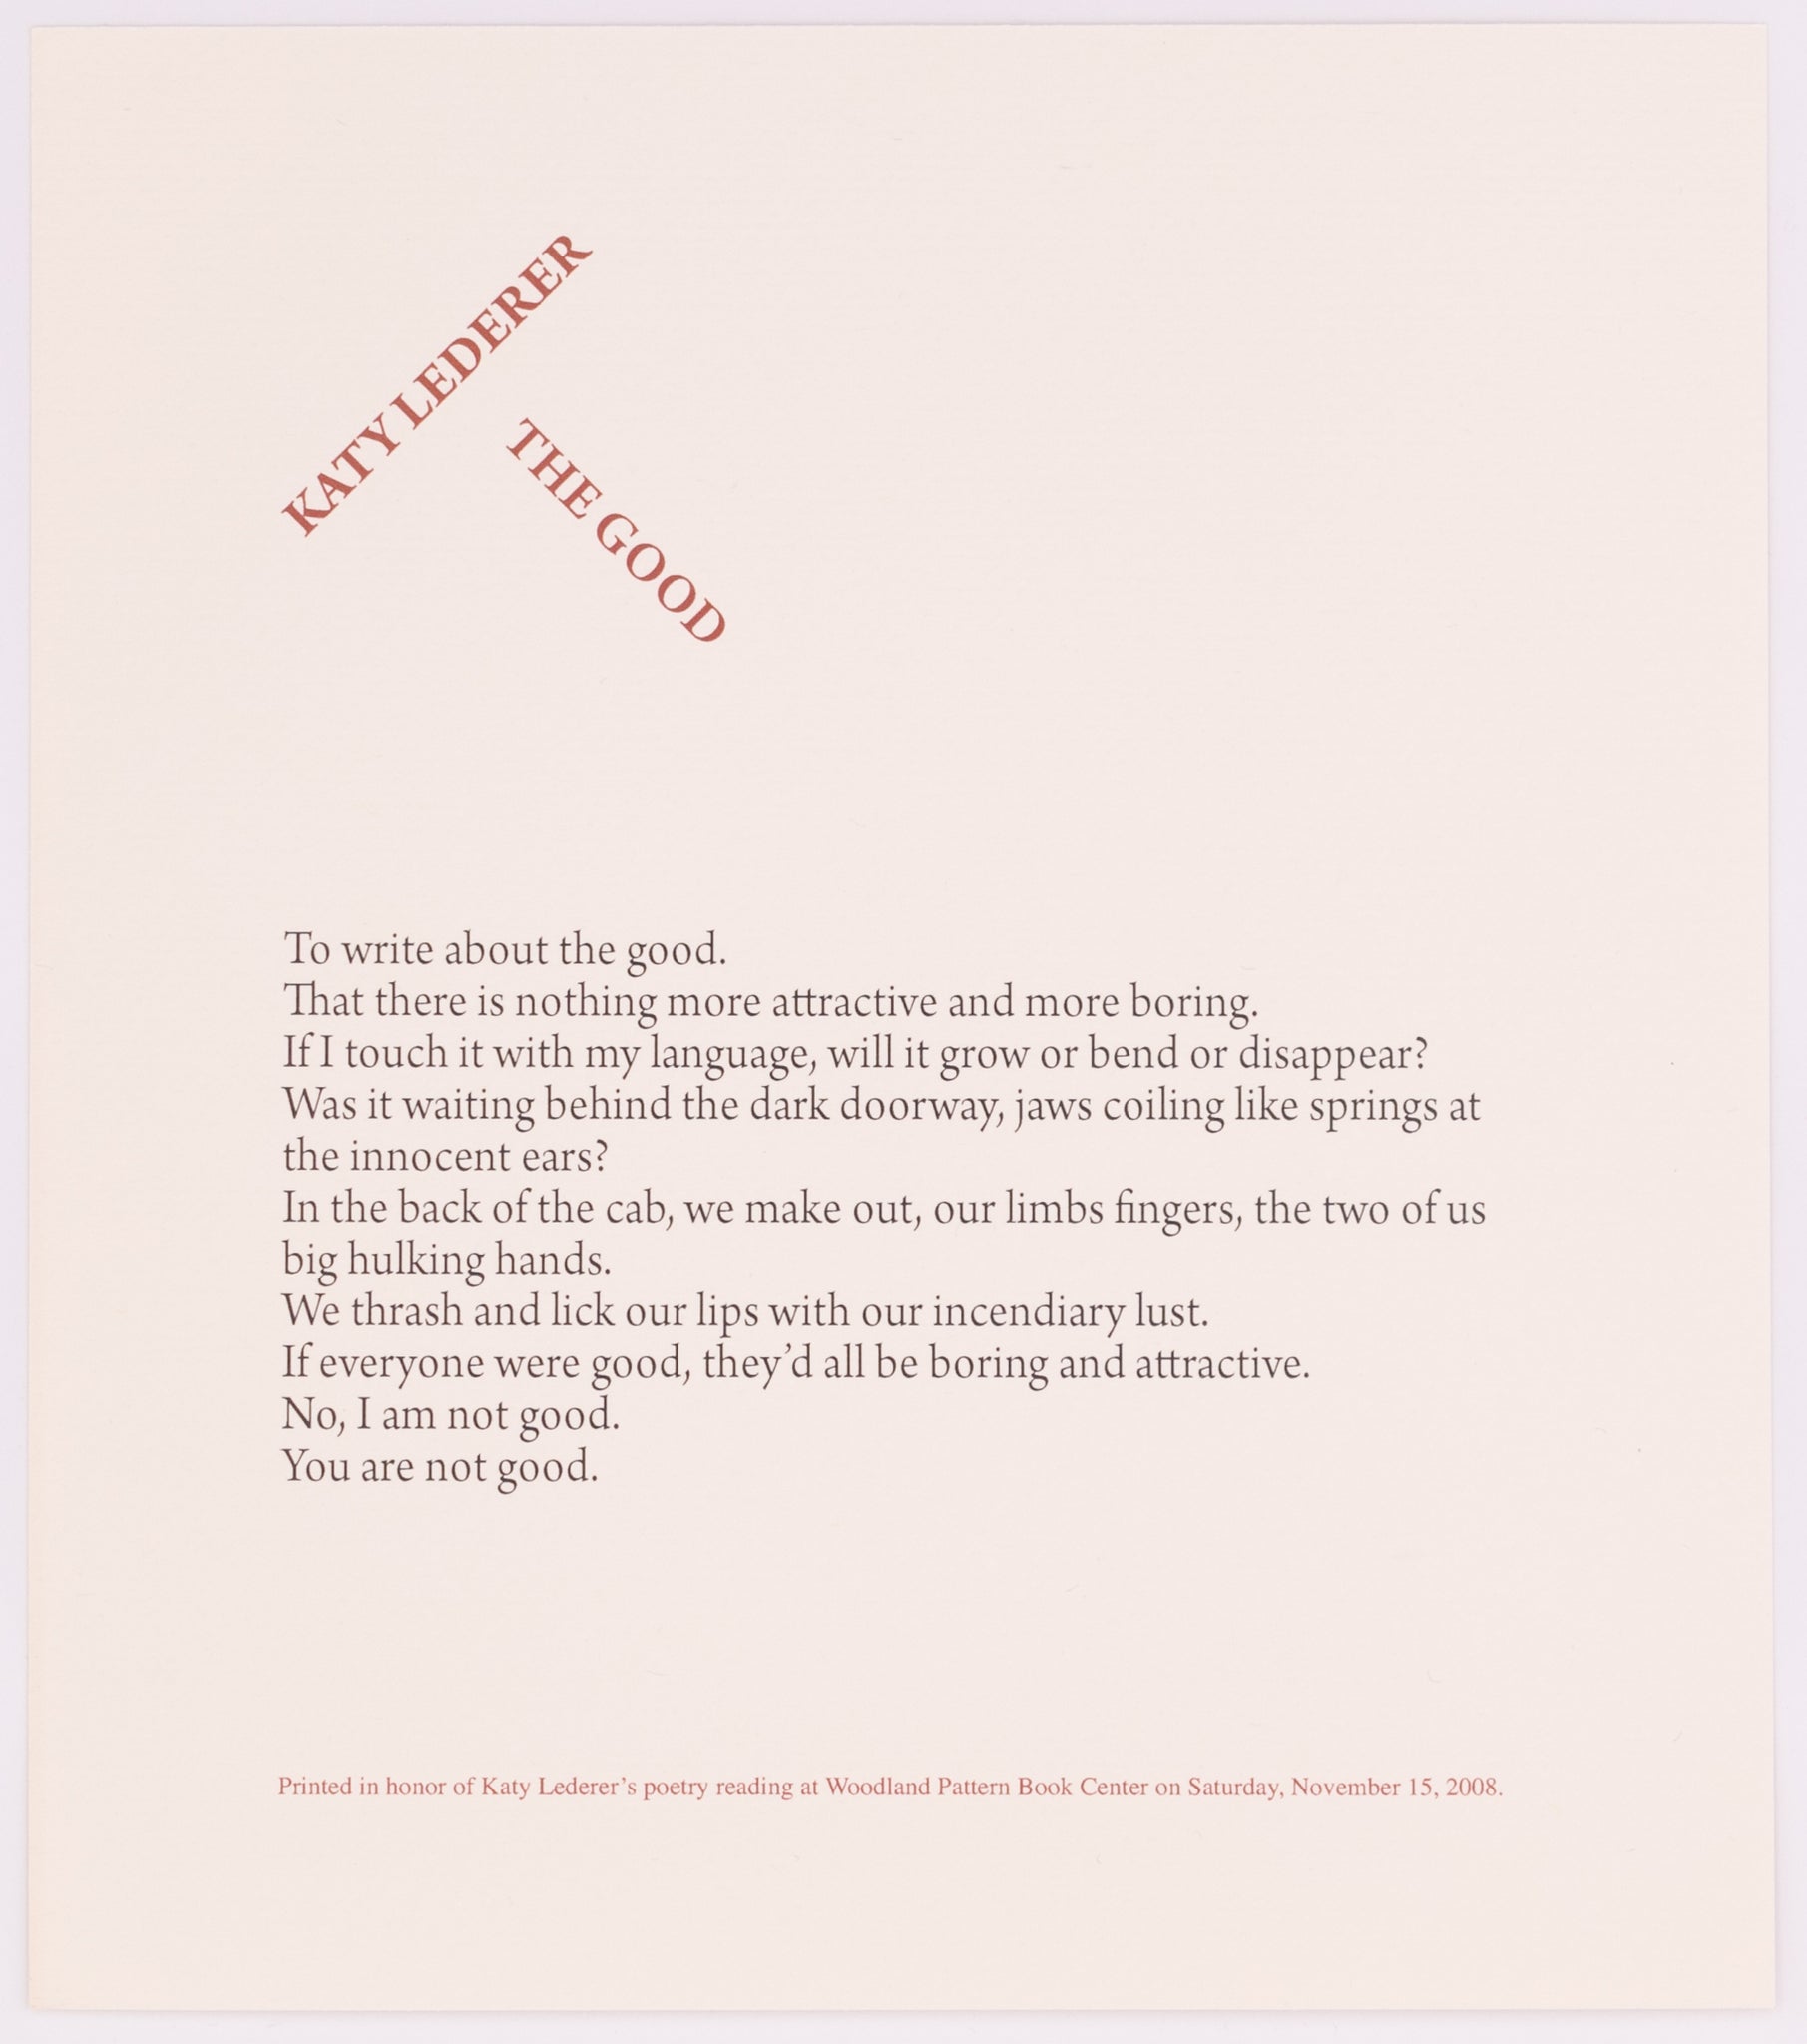 Broadside titled The Good by Katy Laderer. Red and black text on cream paper.